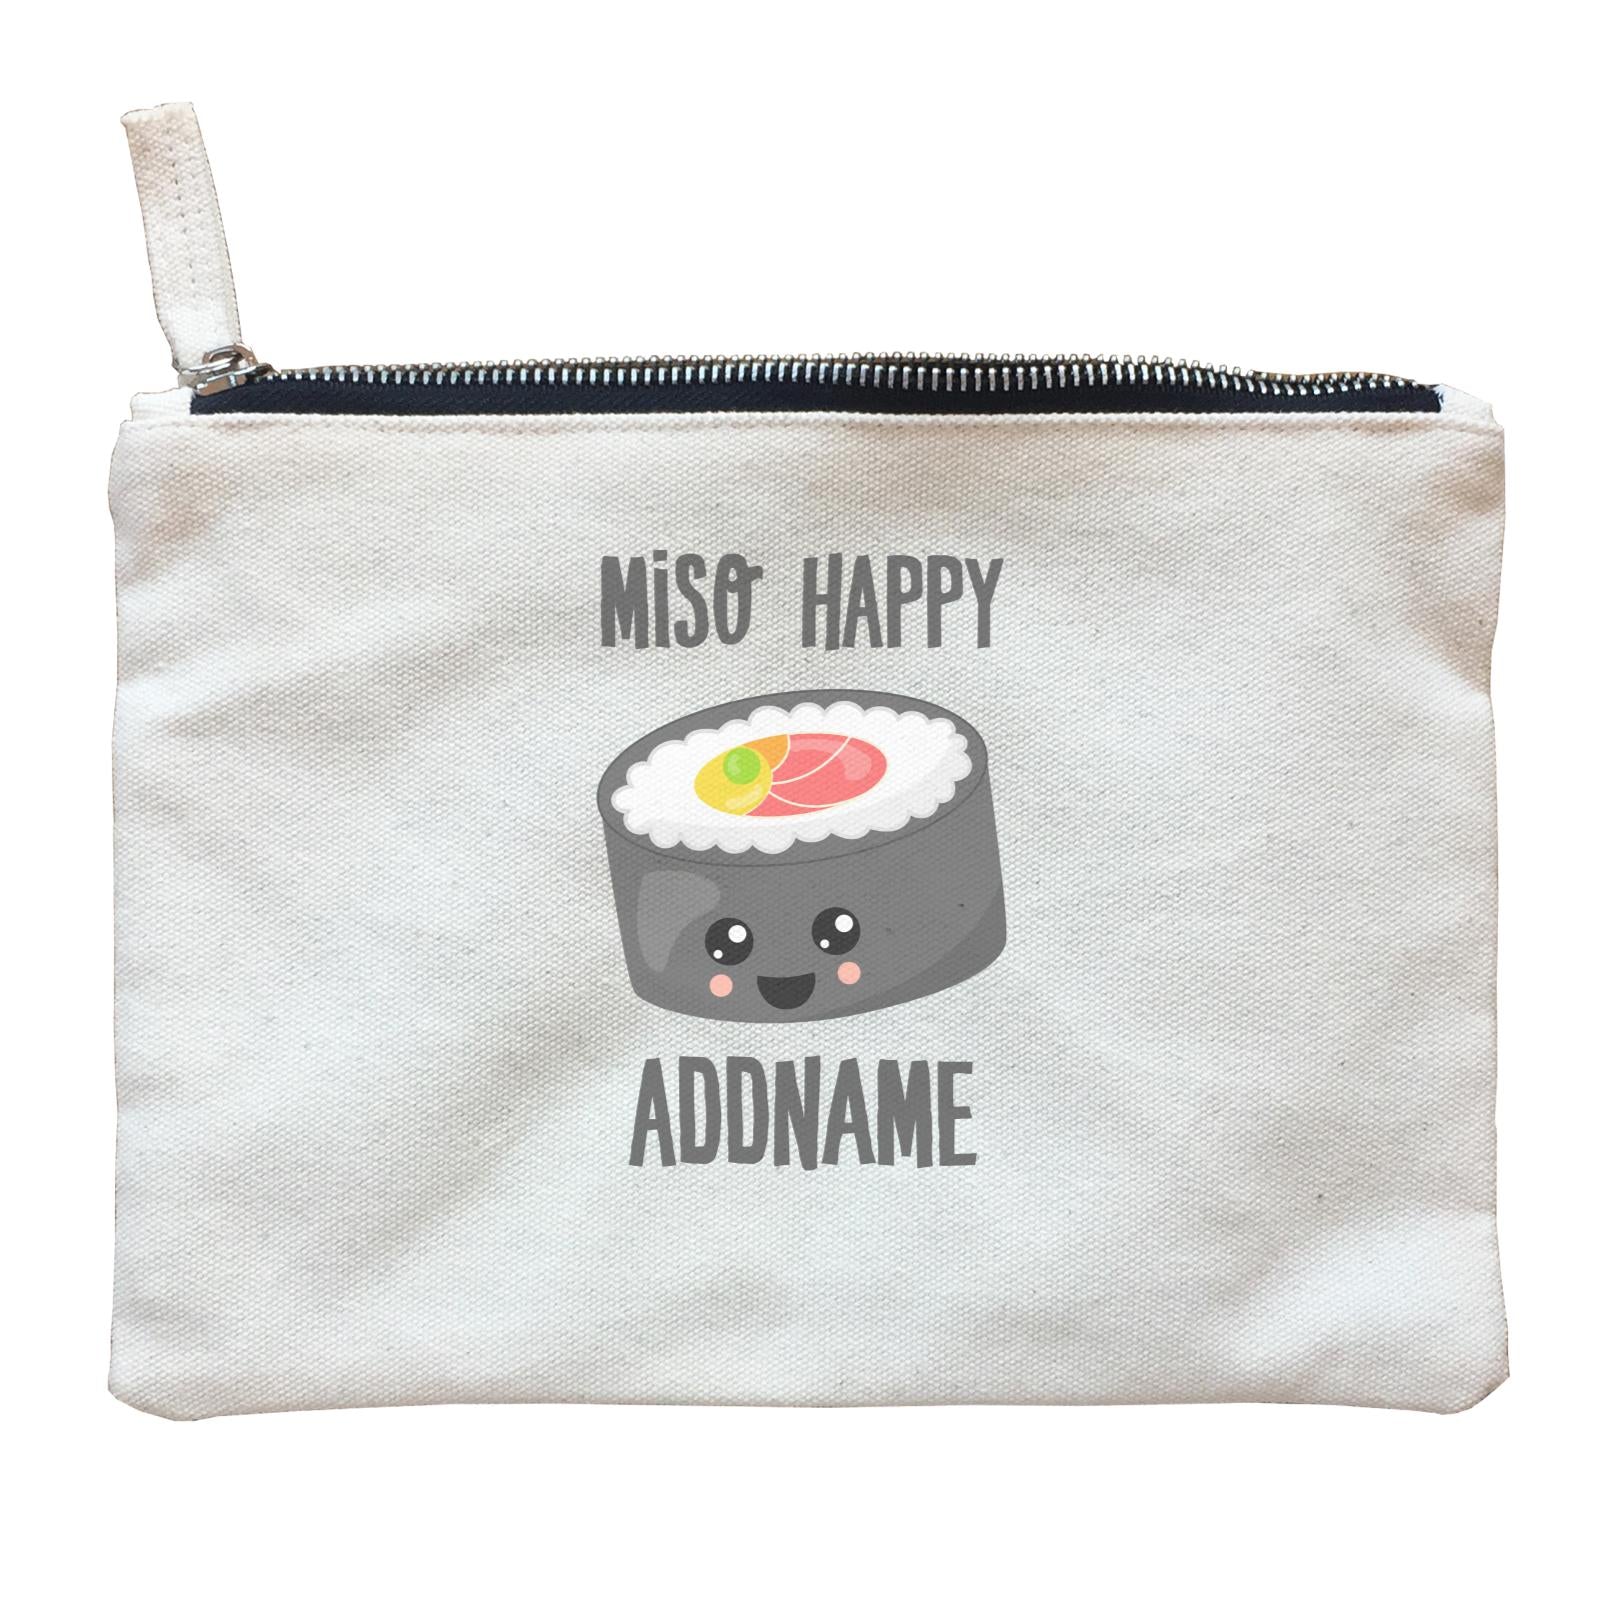 Miso Happy Sushi Circle Roll Addname Zipper Pouch